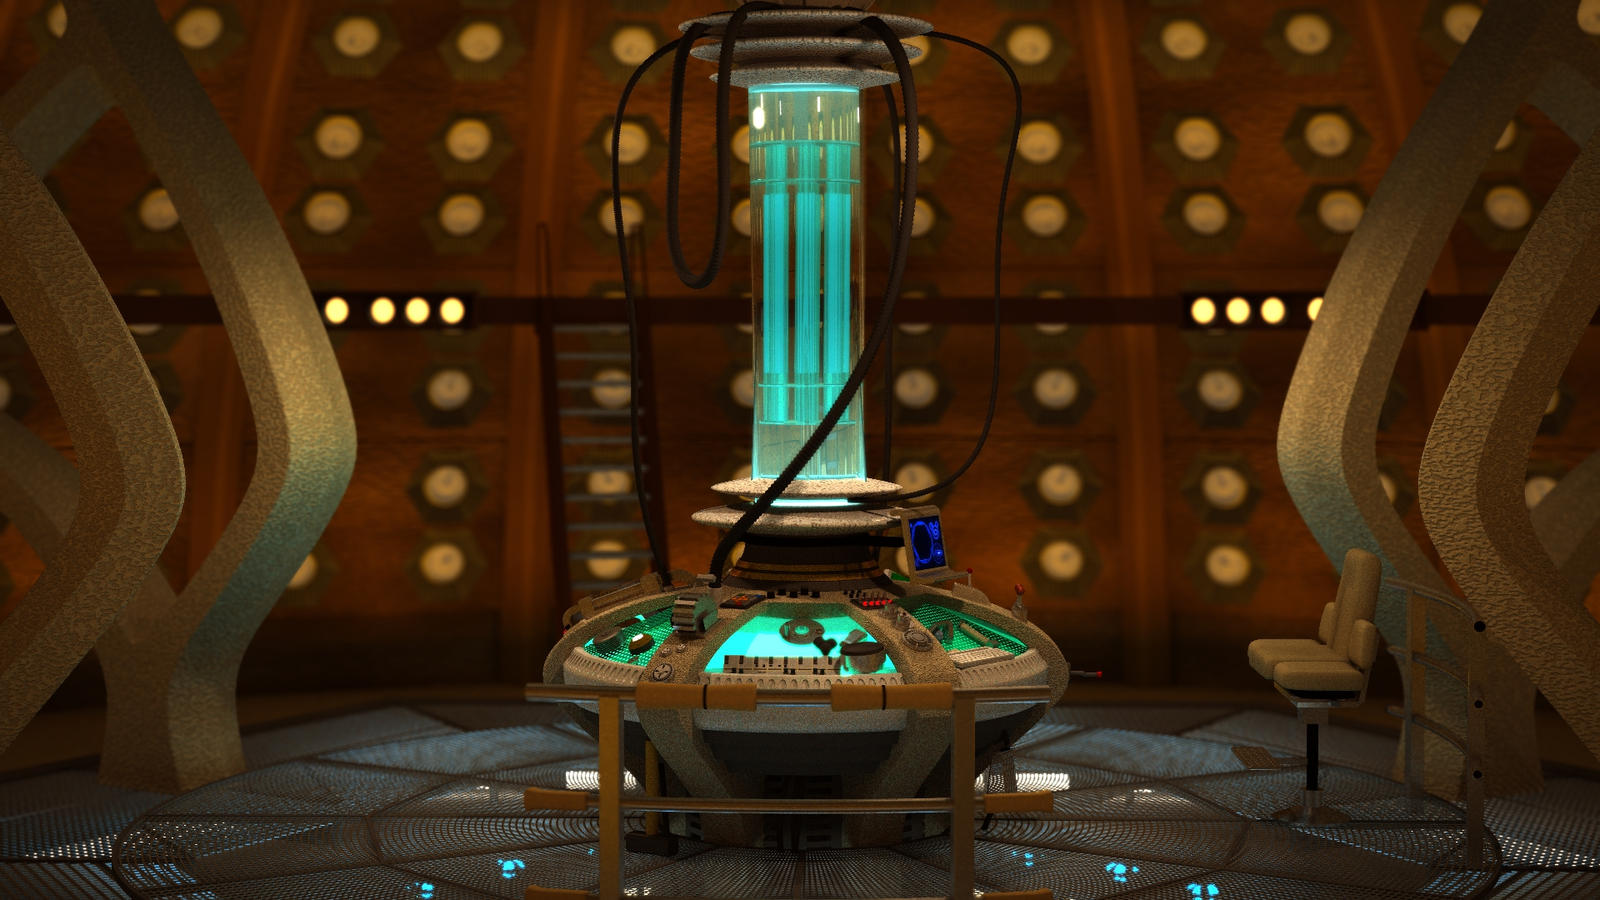 Tardis Inside 10th Doctor Wallpaper Images Free Download - roblox doctor who 9th10th doctors tardis